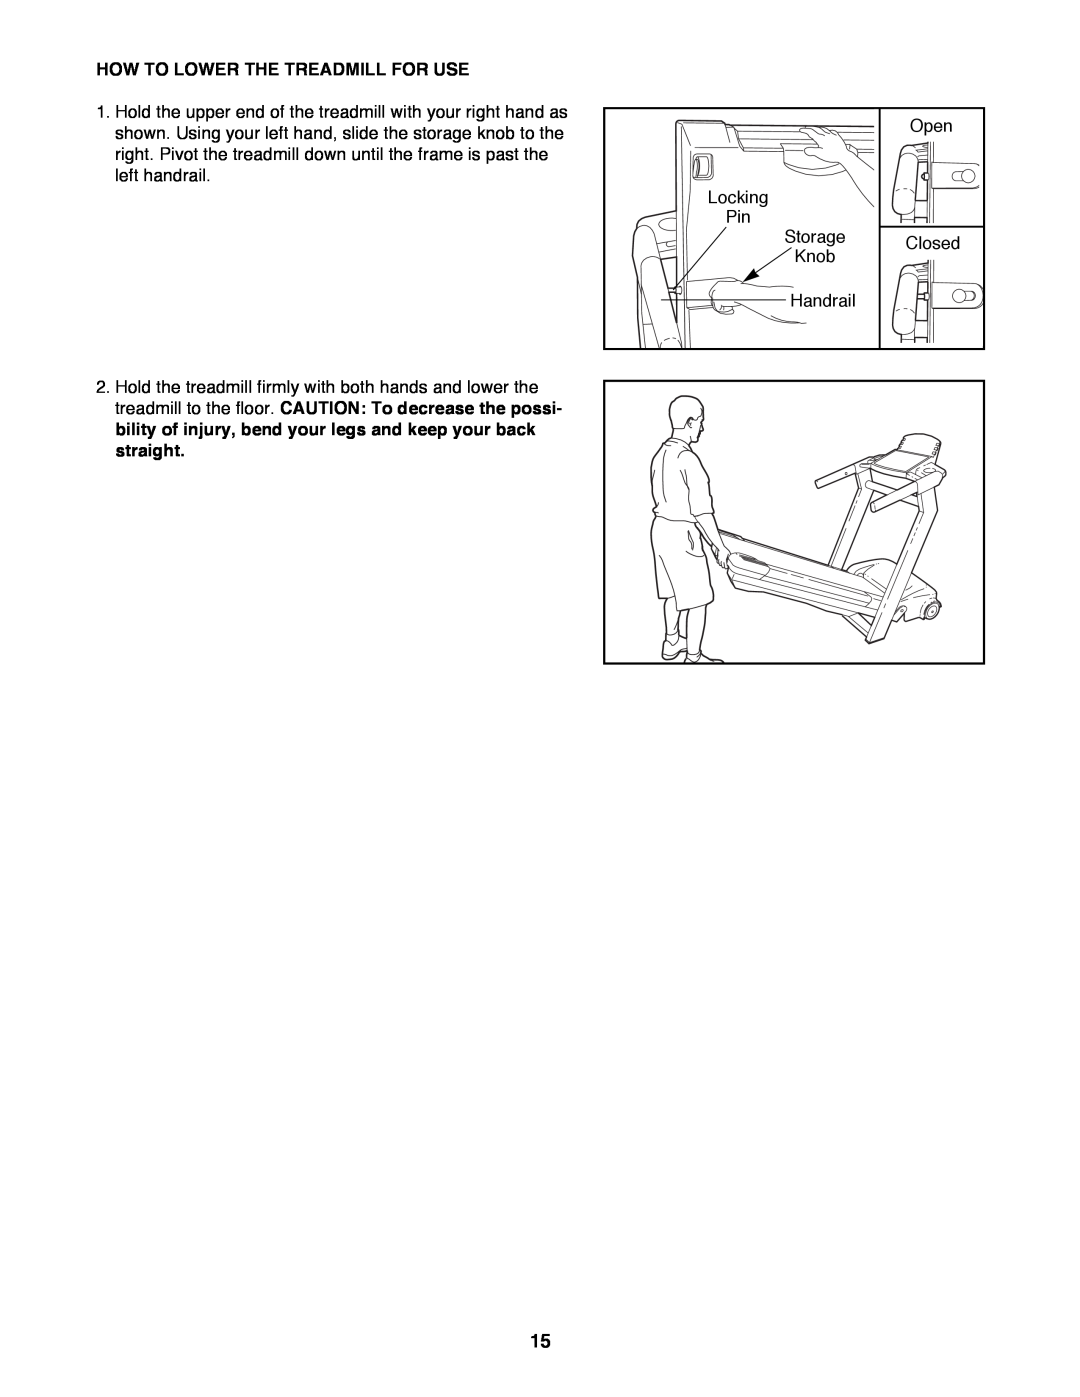 Reebok Fitness RBTL11981 manual How To Lower The Treadmill For Use 